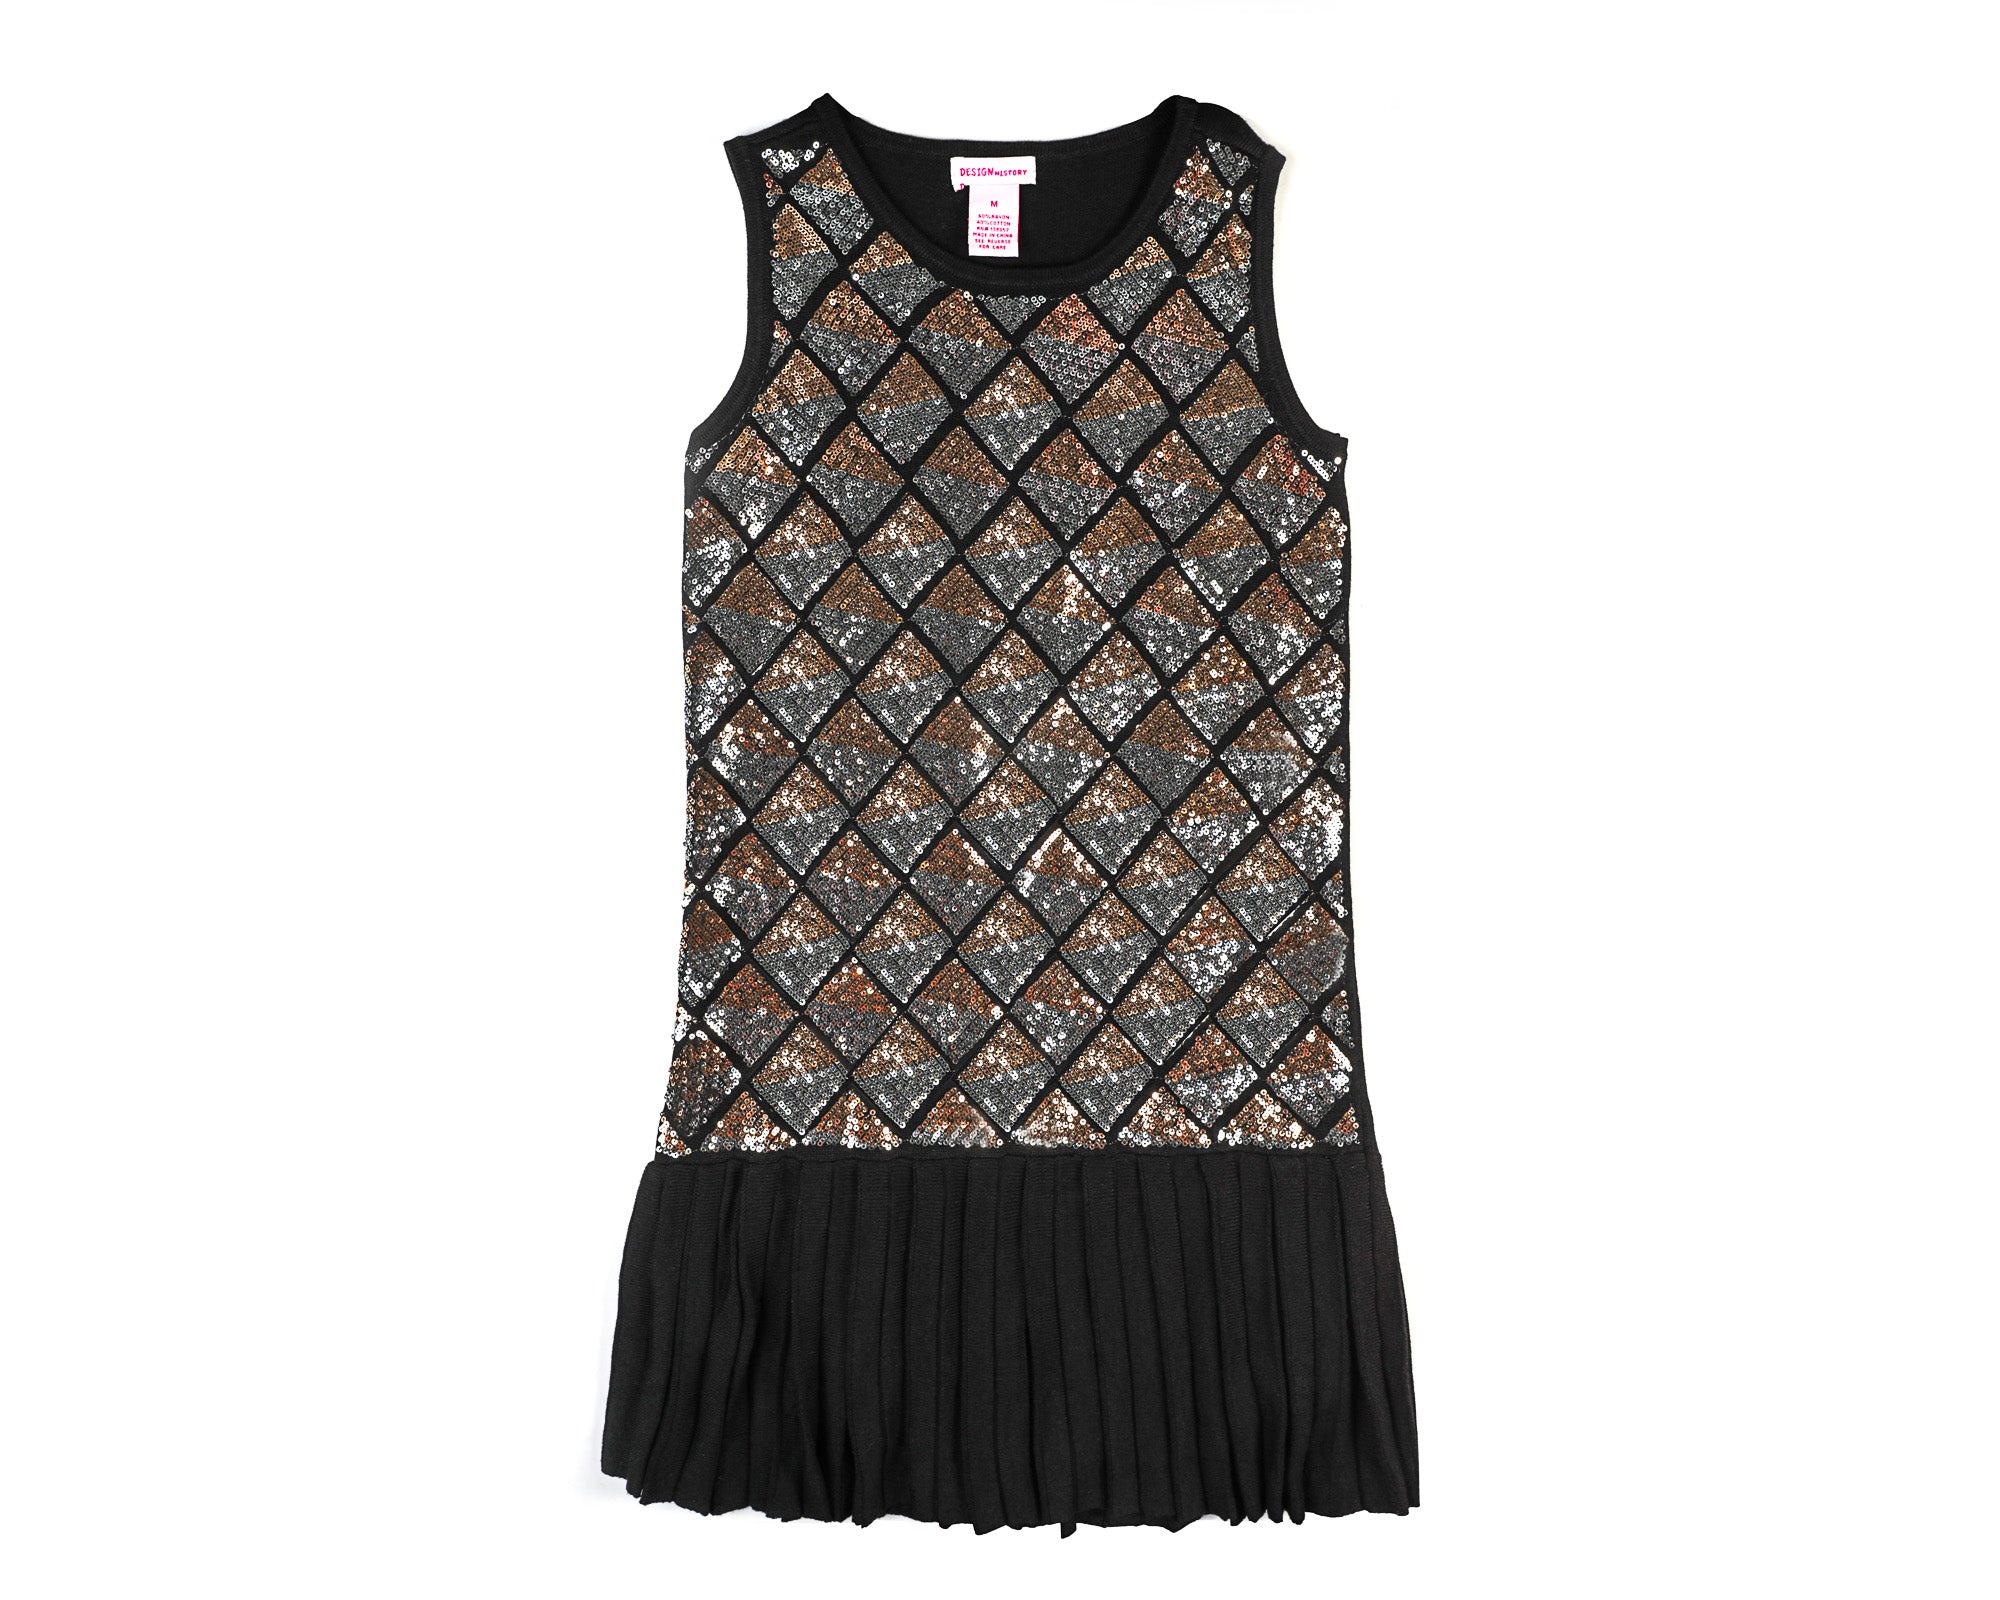 Sleeveless fancy party dress for girls featuring a black pleated skirt and adorned with gold sequins